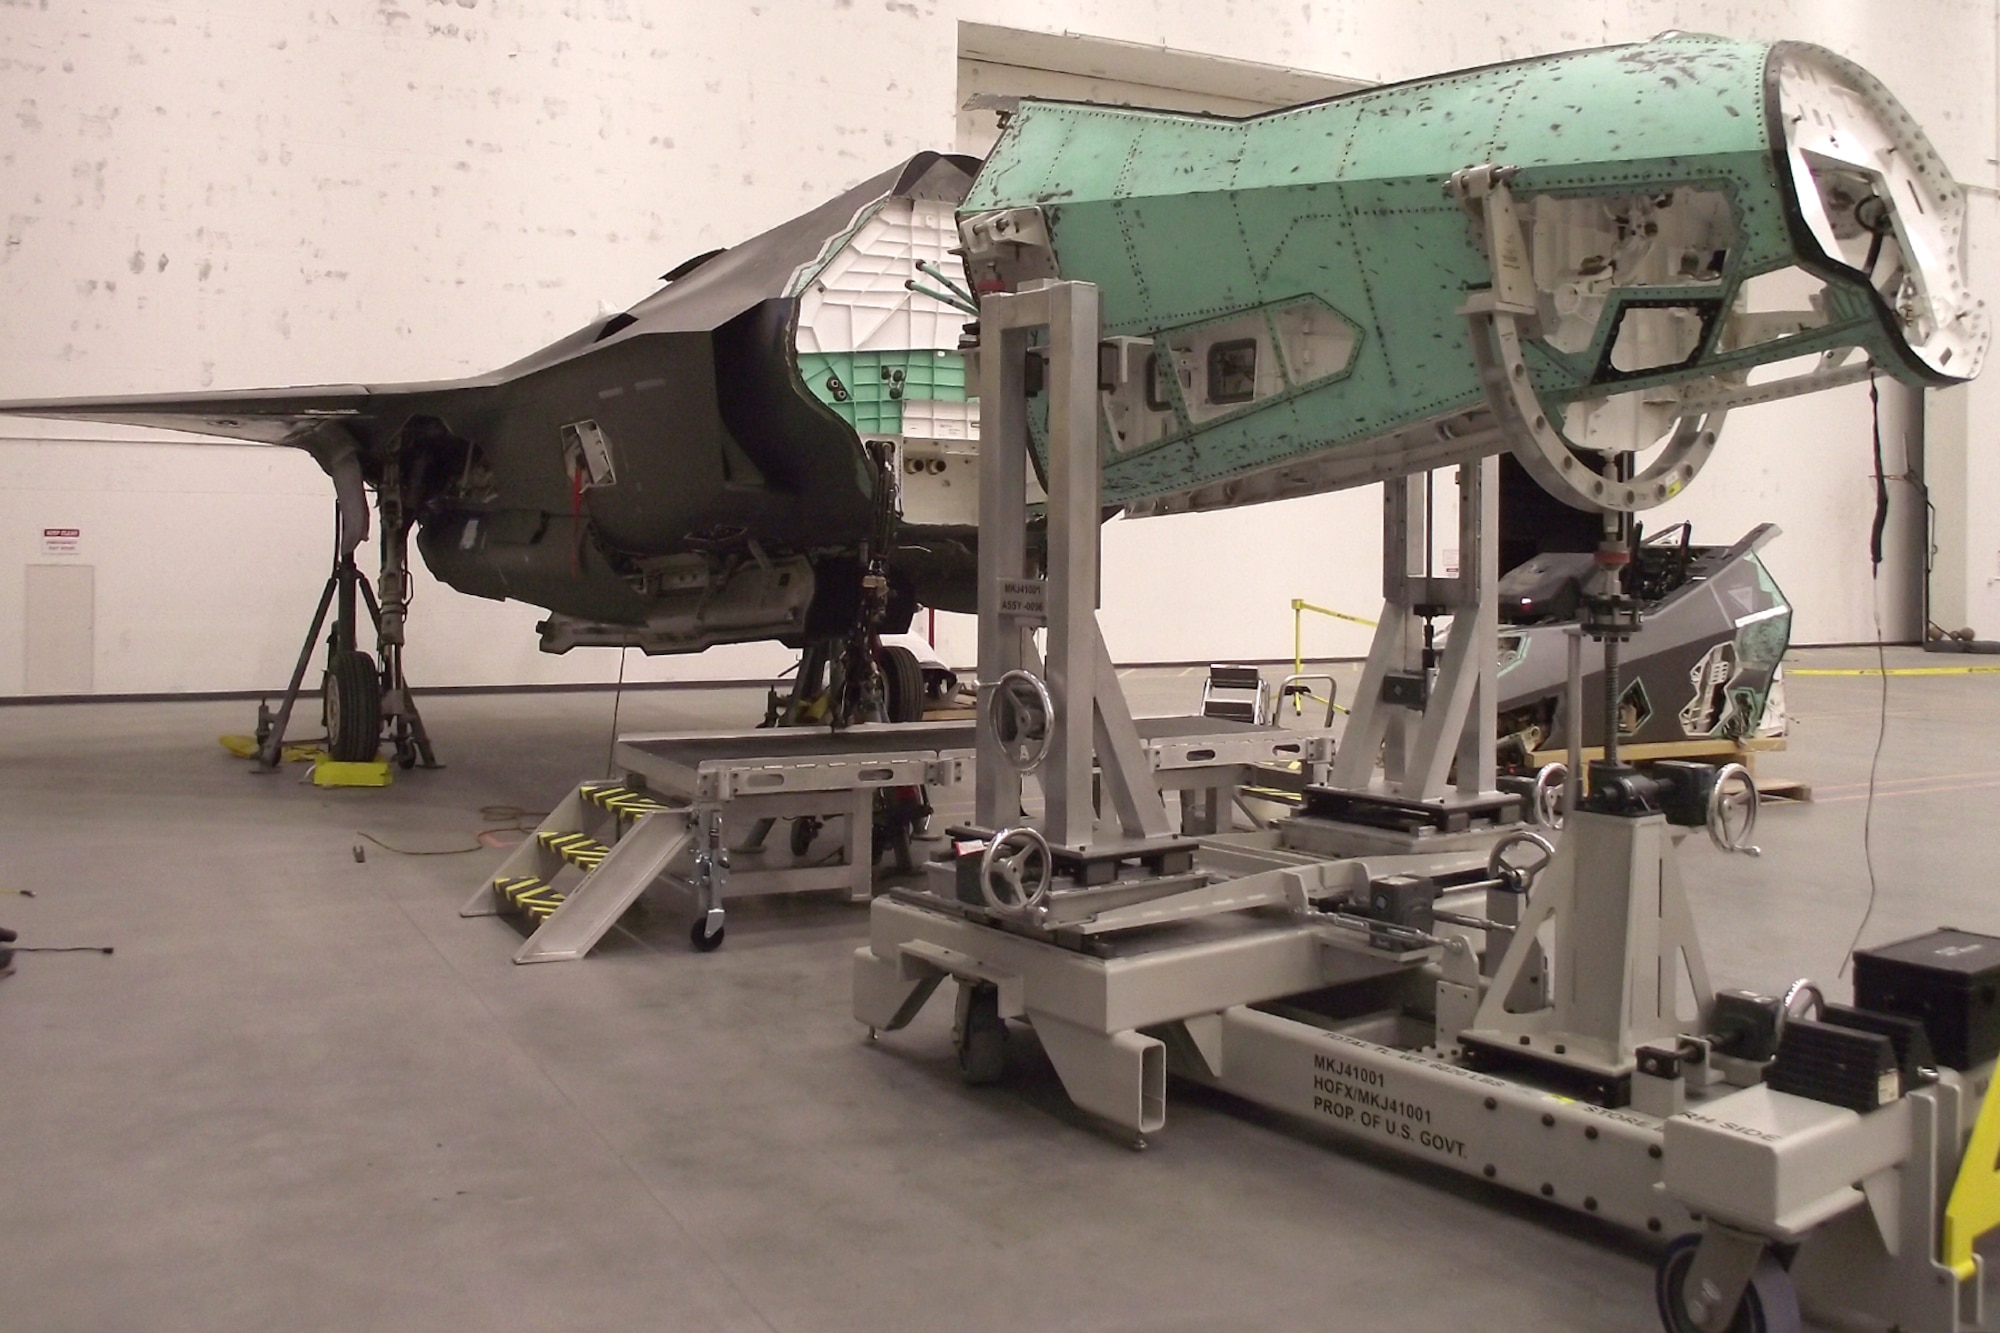 A new Mobil Maintenance System supports the donated nose section from a salvaged F-35 airframe used as an Aircraft Battle Damage Repair trainer at Hill Air Force Base, Utah, in October 2023. The MMS was created to de-mate and re-mate aircraft sections during a total reconstruction project of a wrecked F-35A Lightning II by the F-35 Joint Program Office. The project aims to restore the aircraft to full operational flying status. (U.S Air Force courtesy photo)